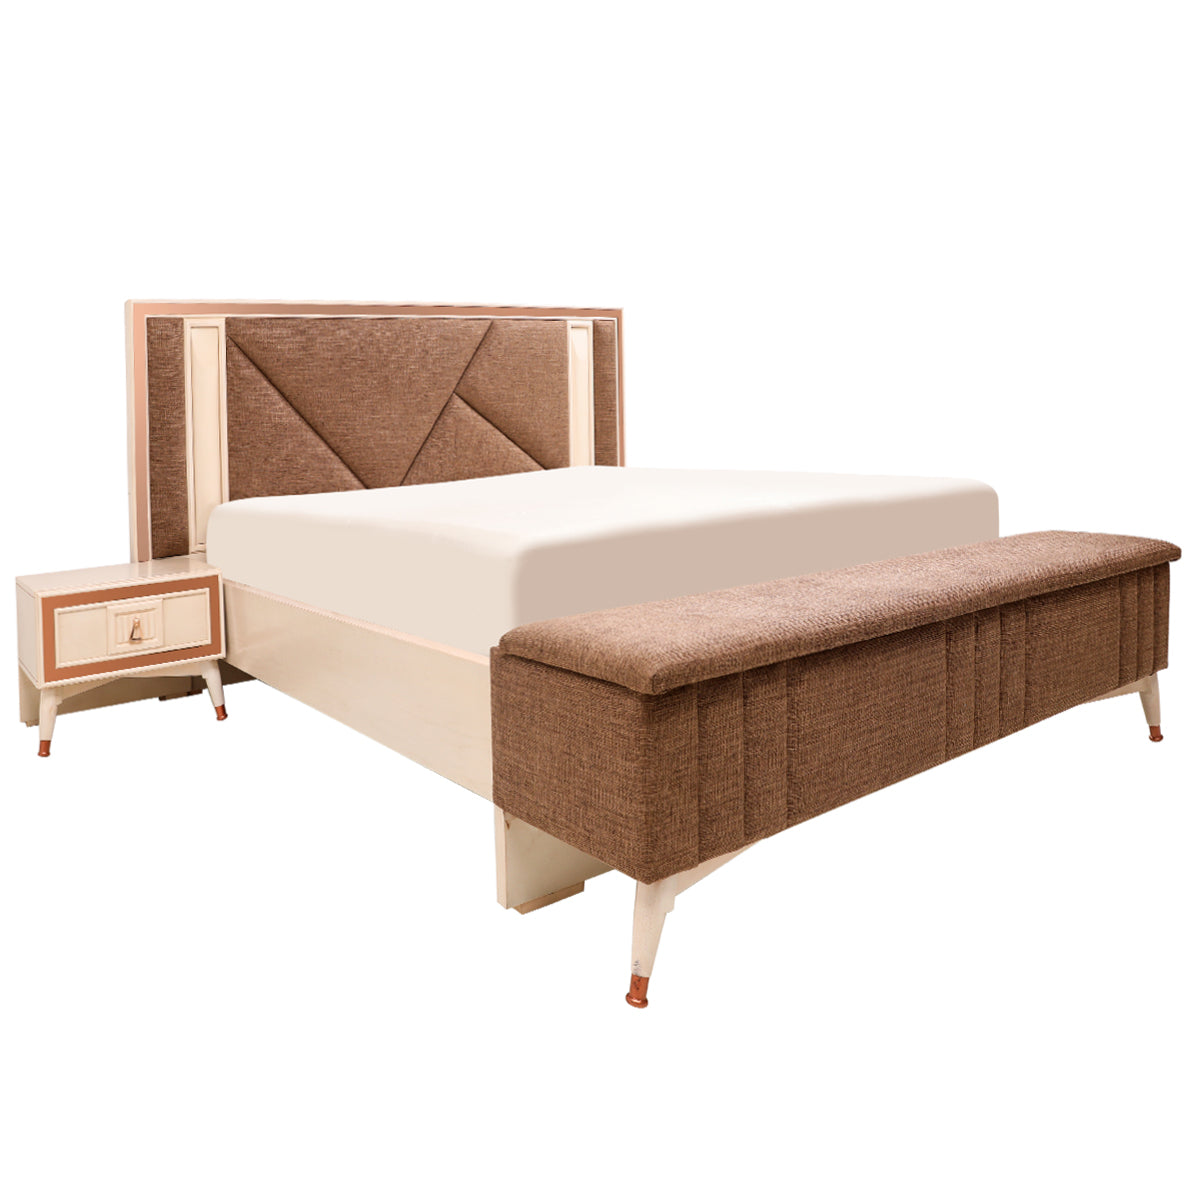 Sapphire King size bed with sides